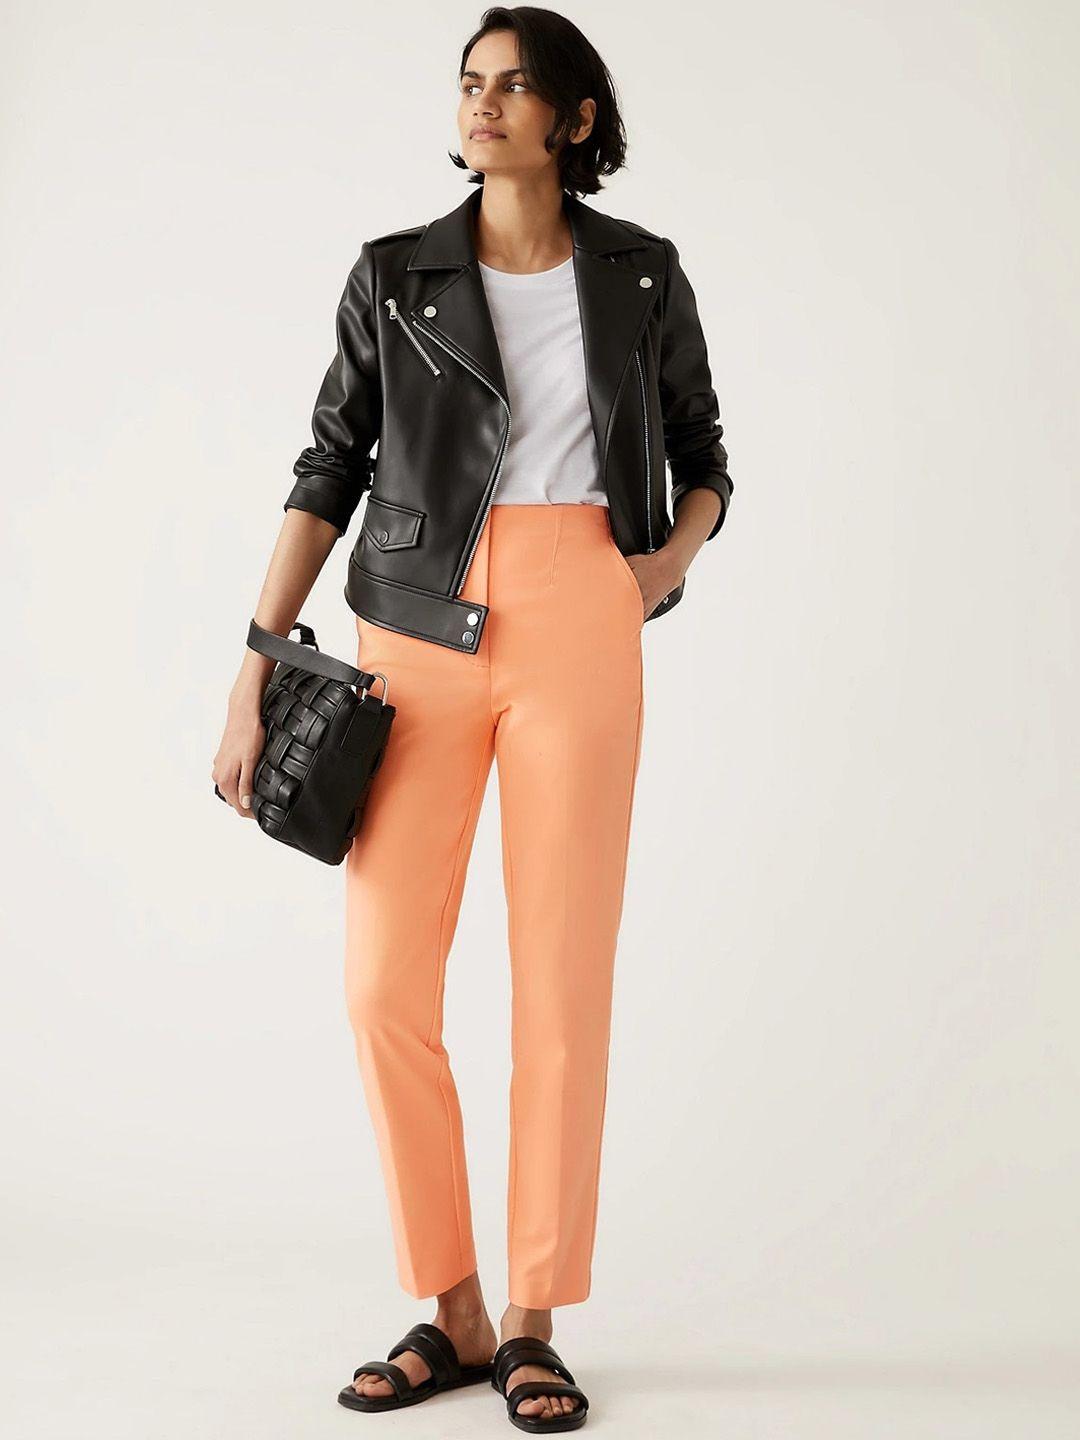 marks-&-spencer-women-high-rise-trousers